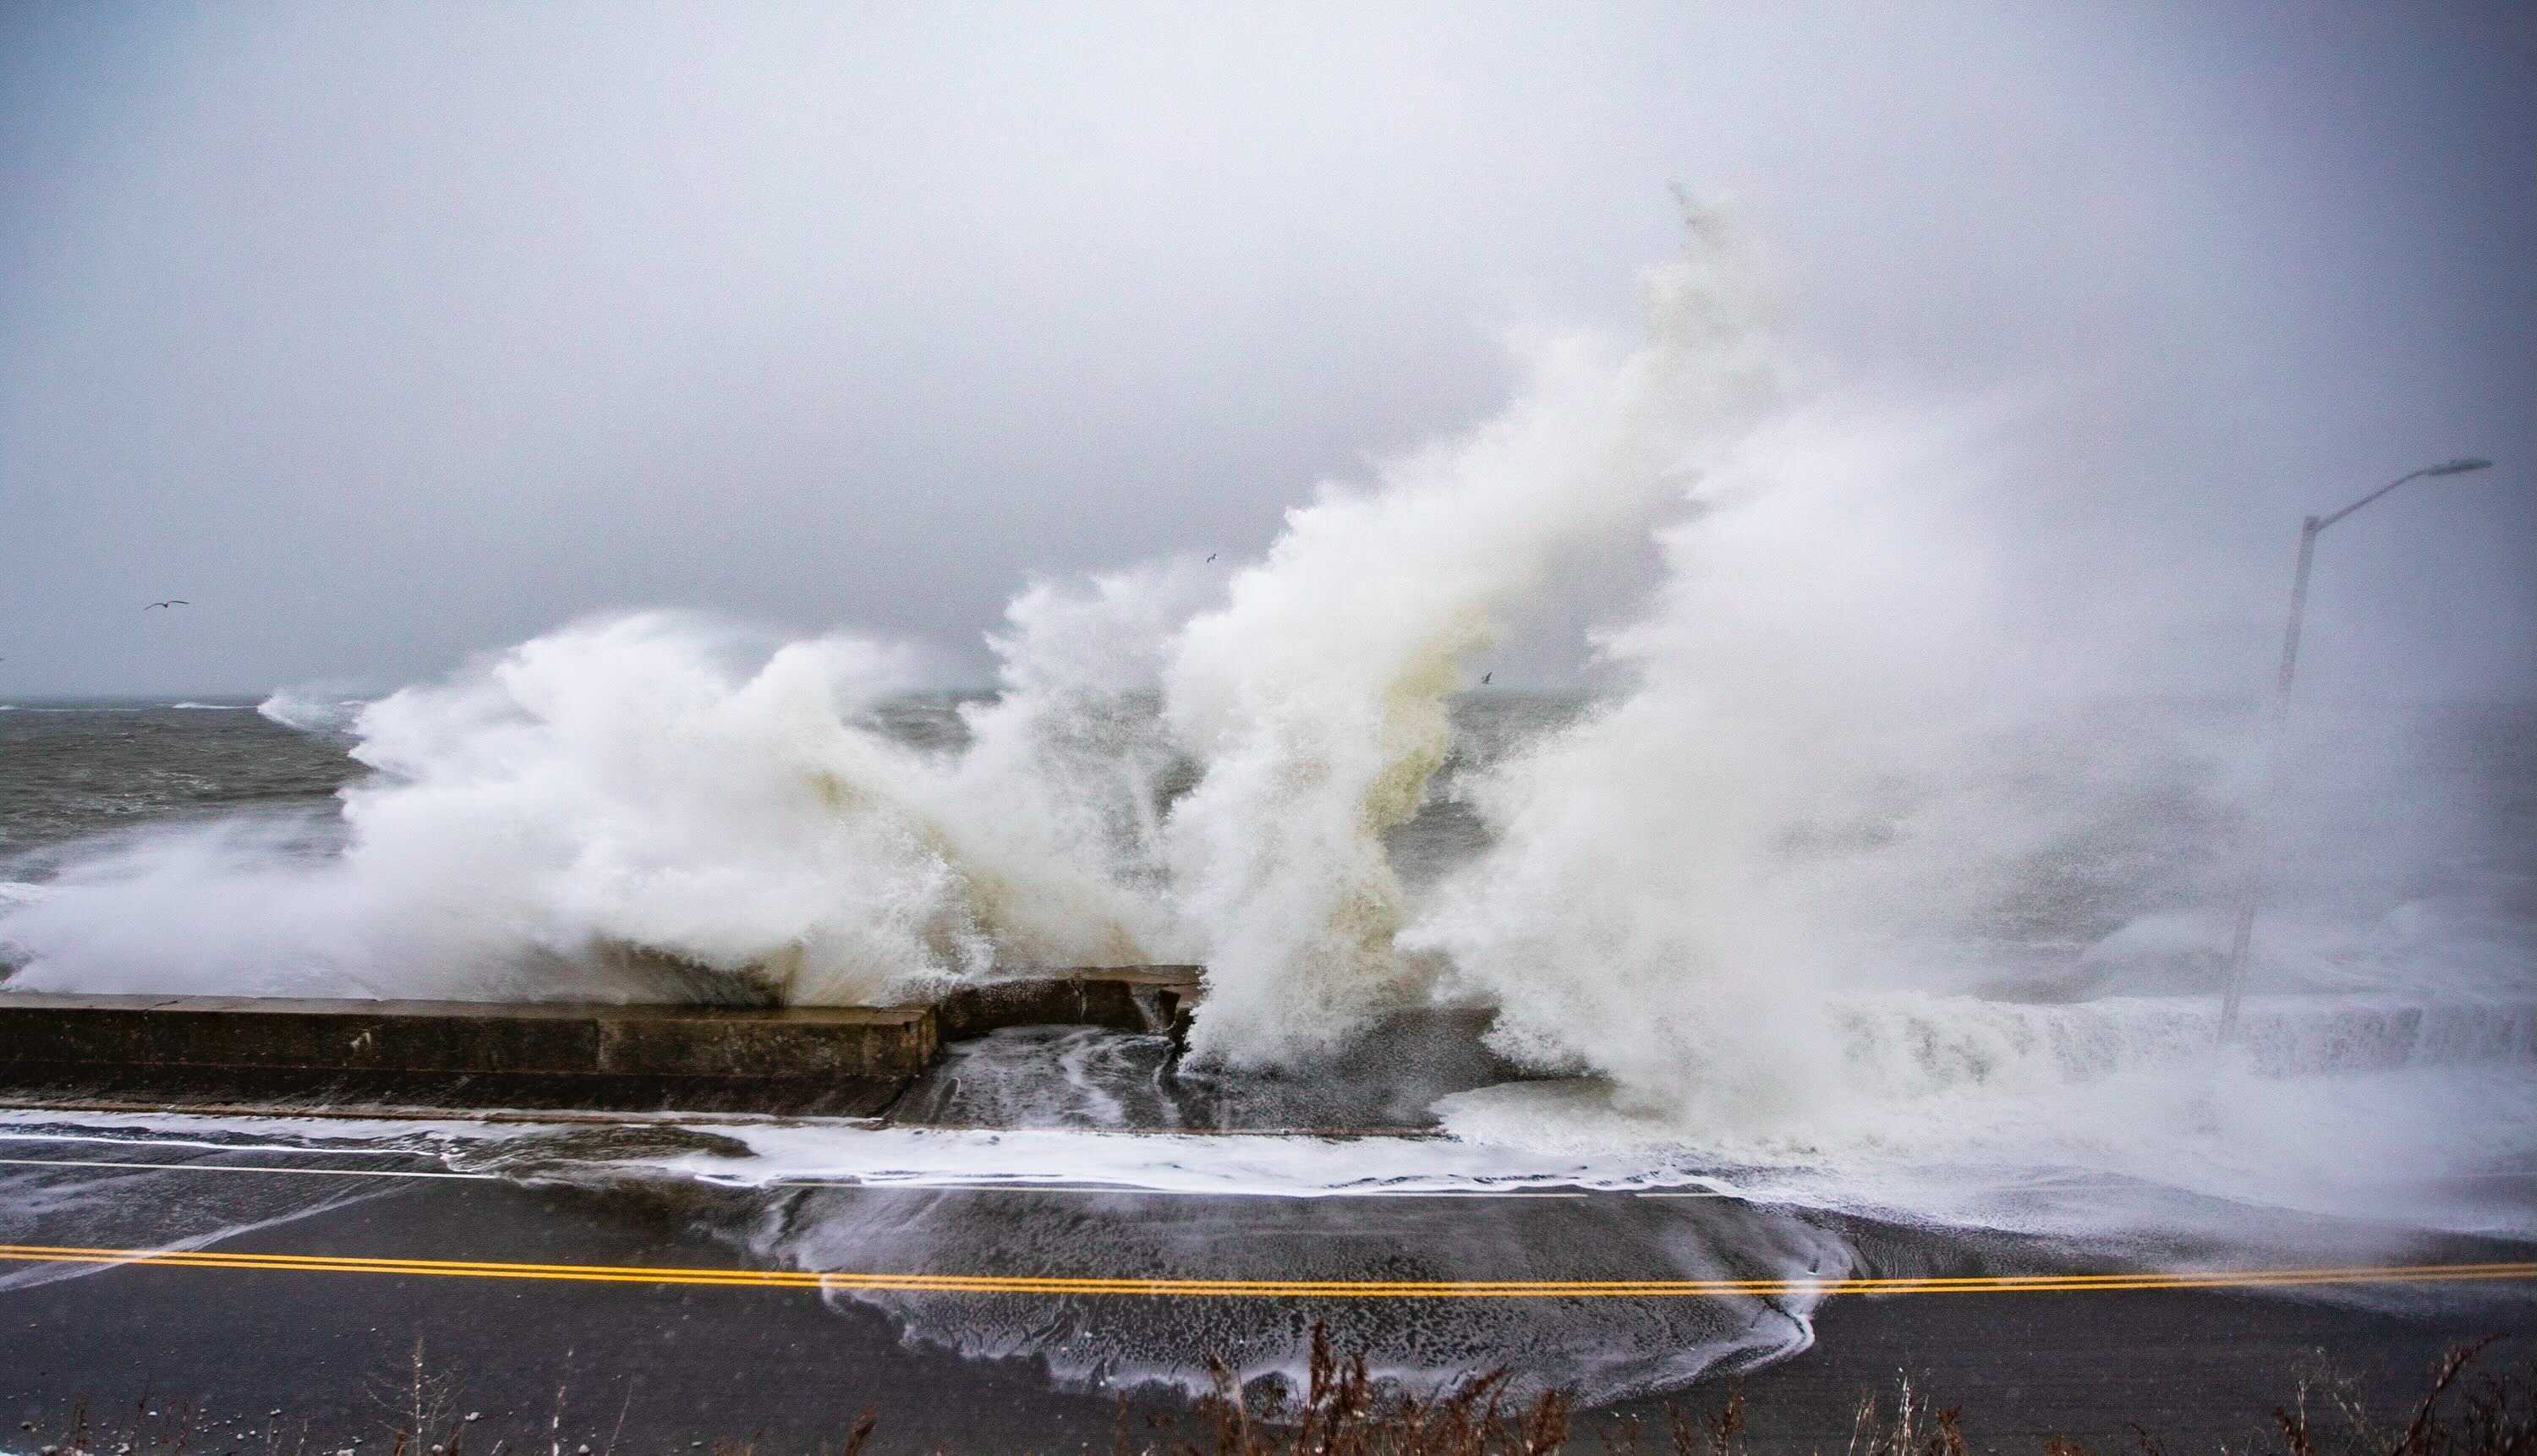 Waves crash over the seawall on Winthrop Parkway in Revere during a high tide on Dec. 17, 2020. (Jesse Costa/WBUR)